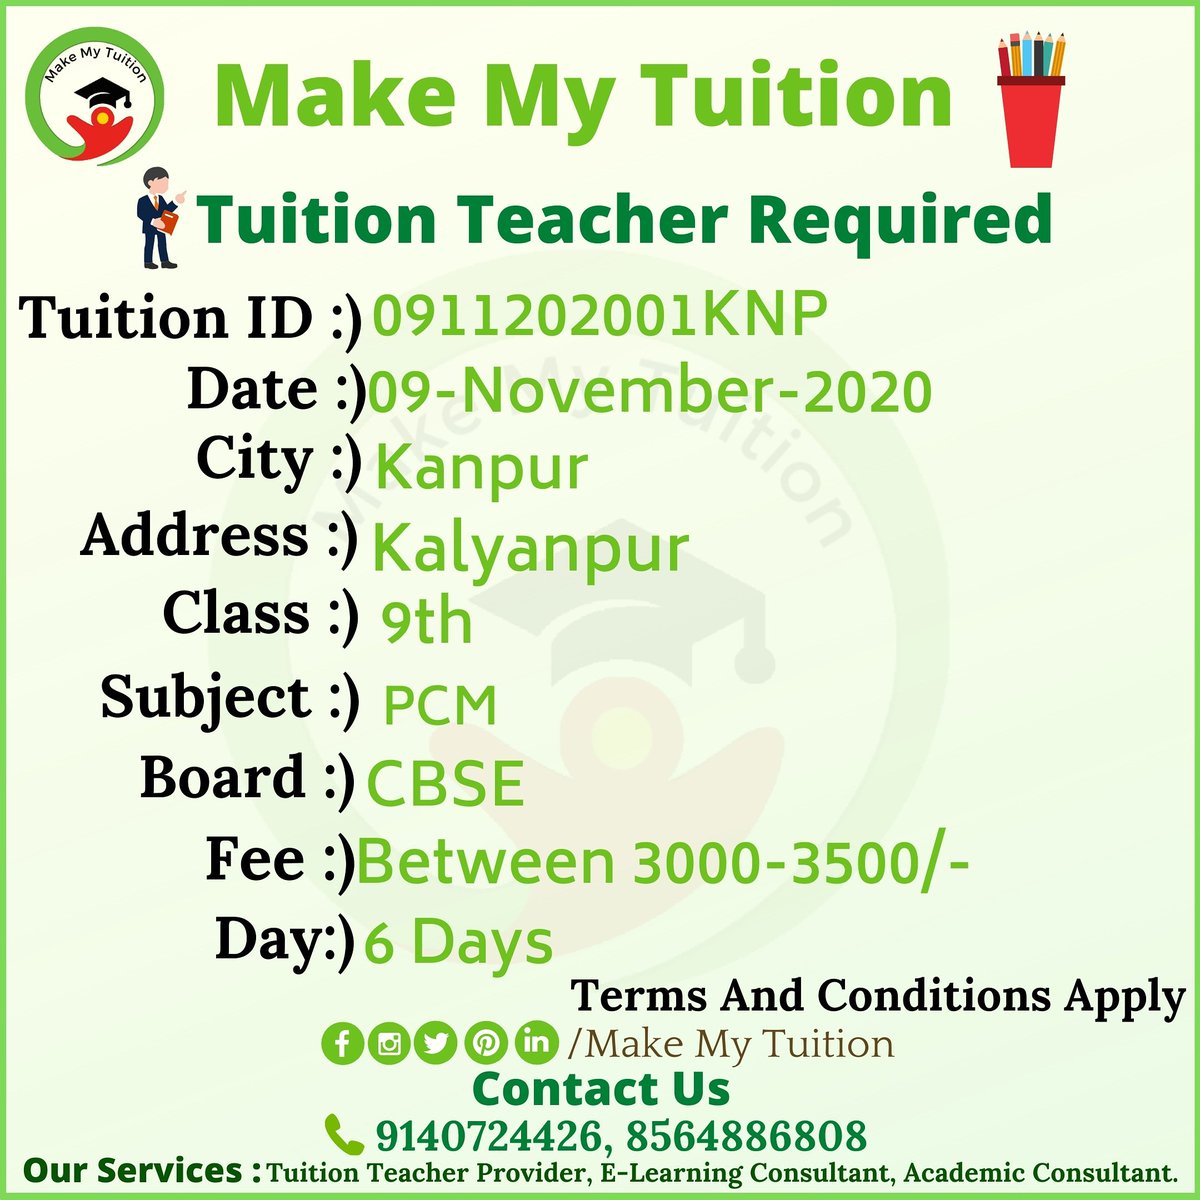 Make My Tuition Tuition Teacher Job Available In Kanpur For More Information Please Visit T Co 4fdpuok2da Or Contact Us Hometuition Tuitionteacher Elearningtips Hometutor Teacher Cbse Icse Isc